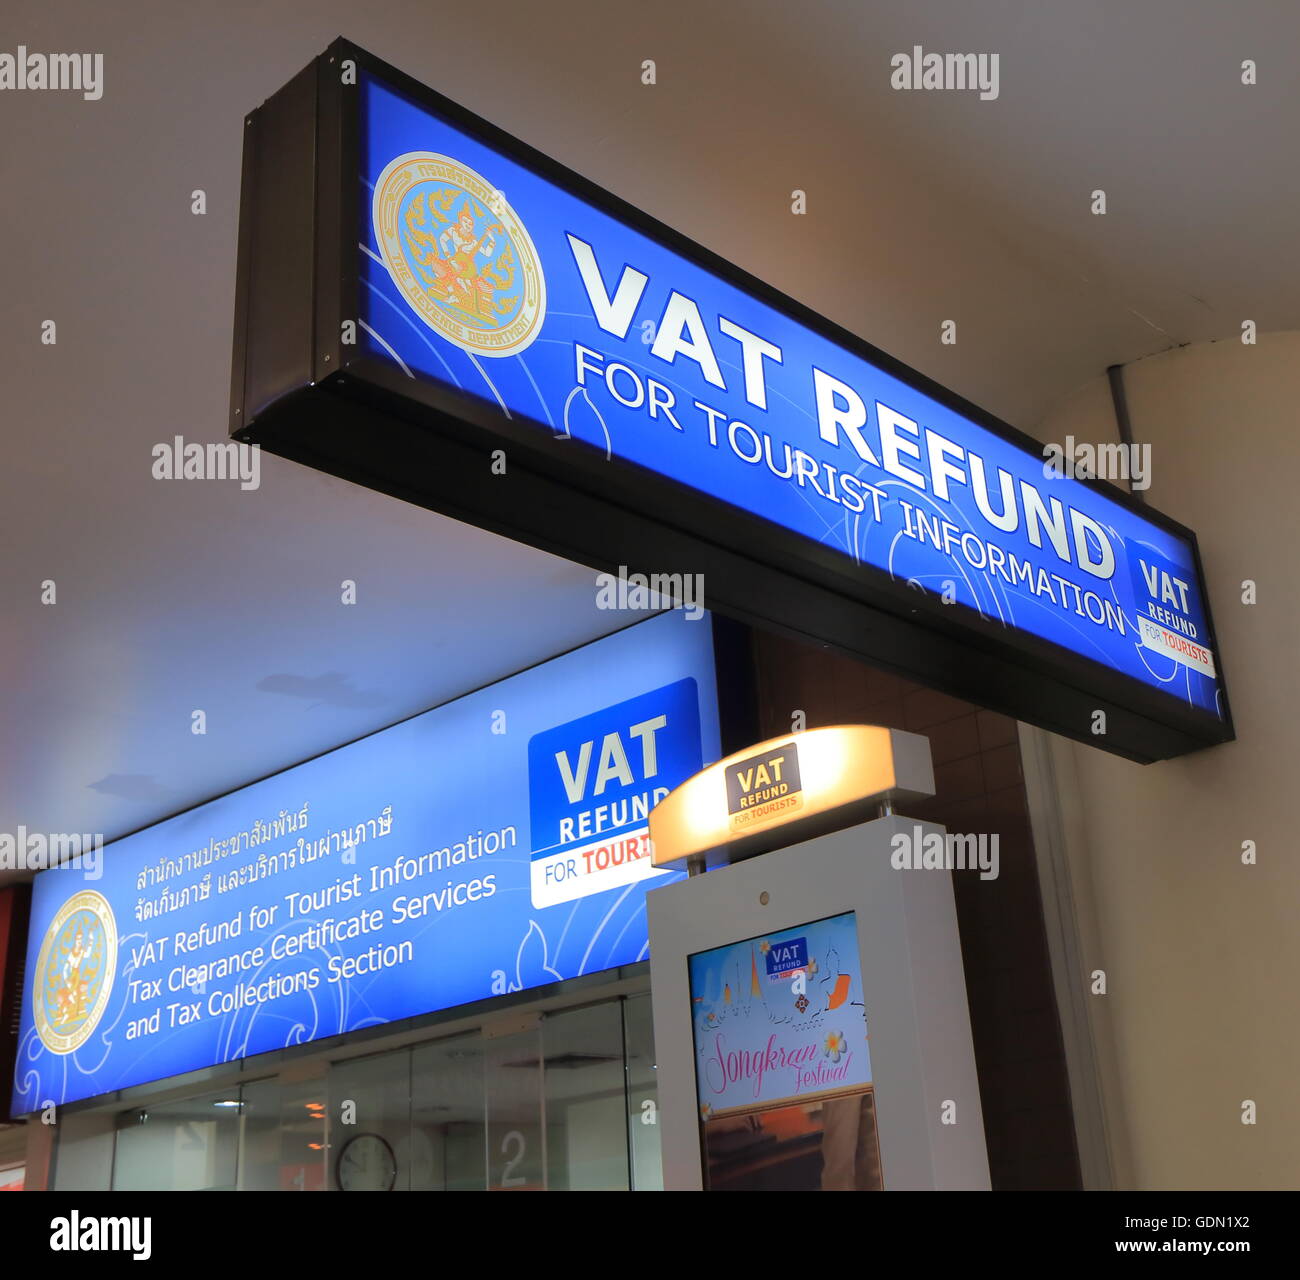 vat-office-in-don-mueang-airport-bangkok-tourists-can-claim-7-vat